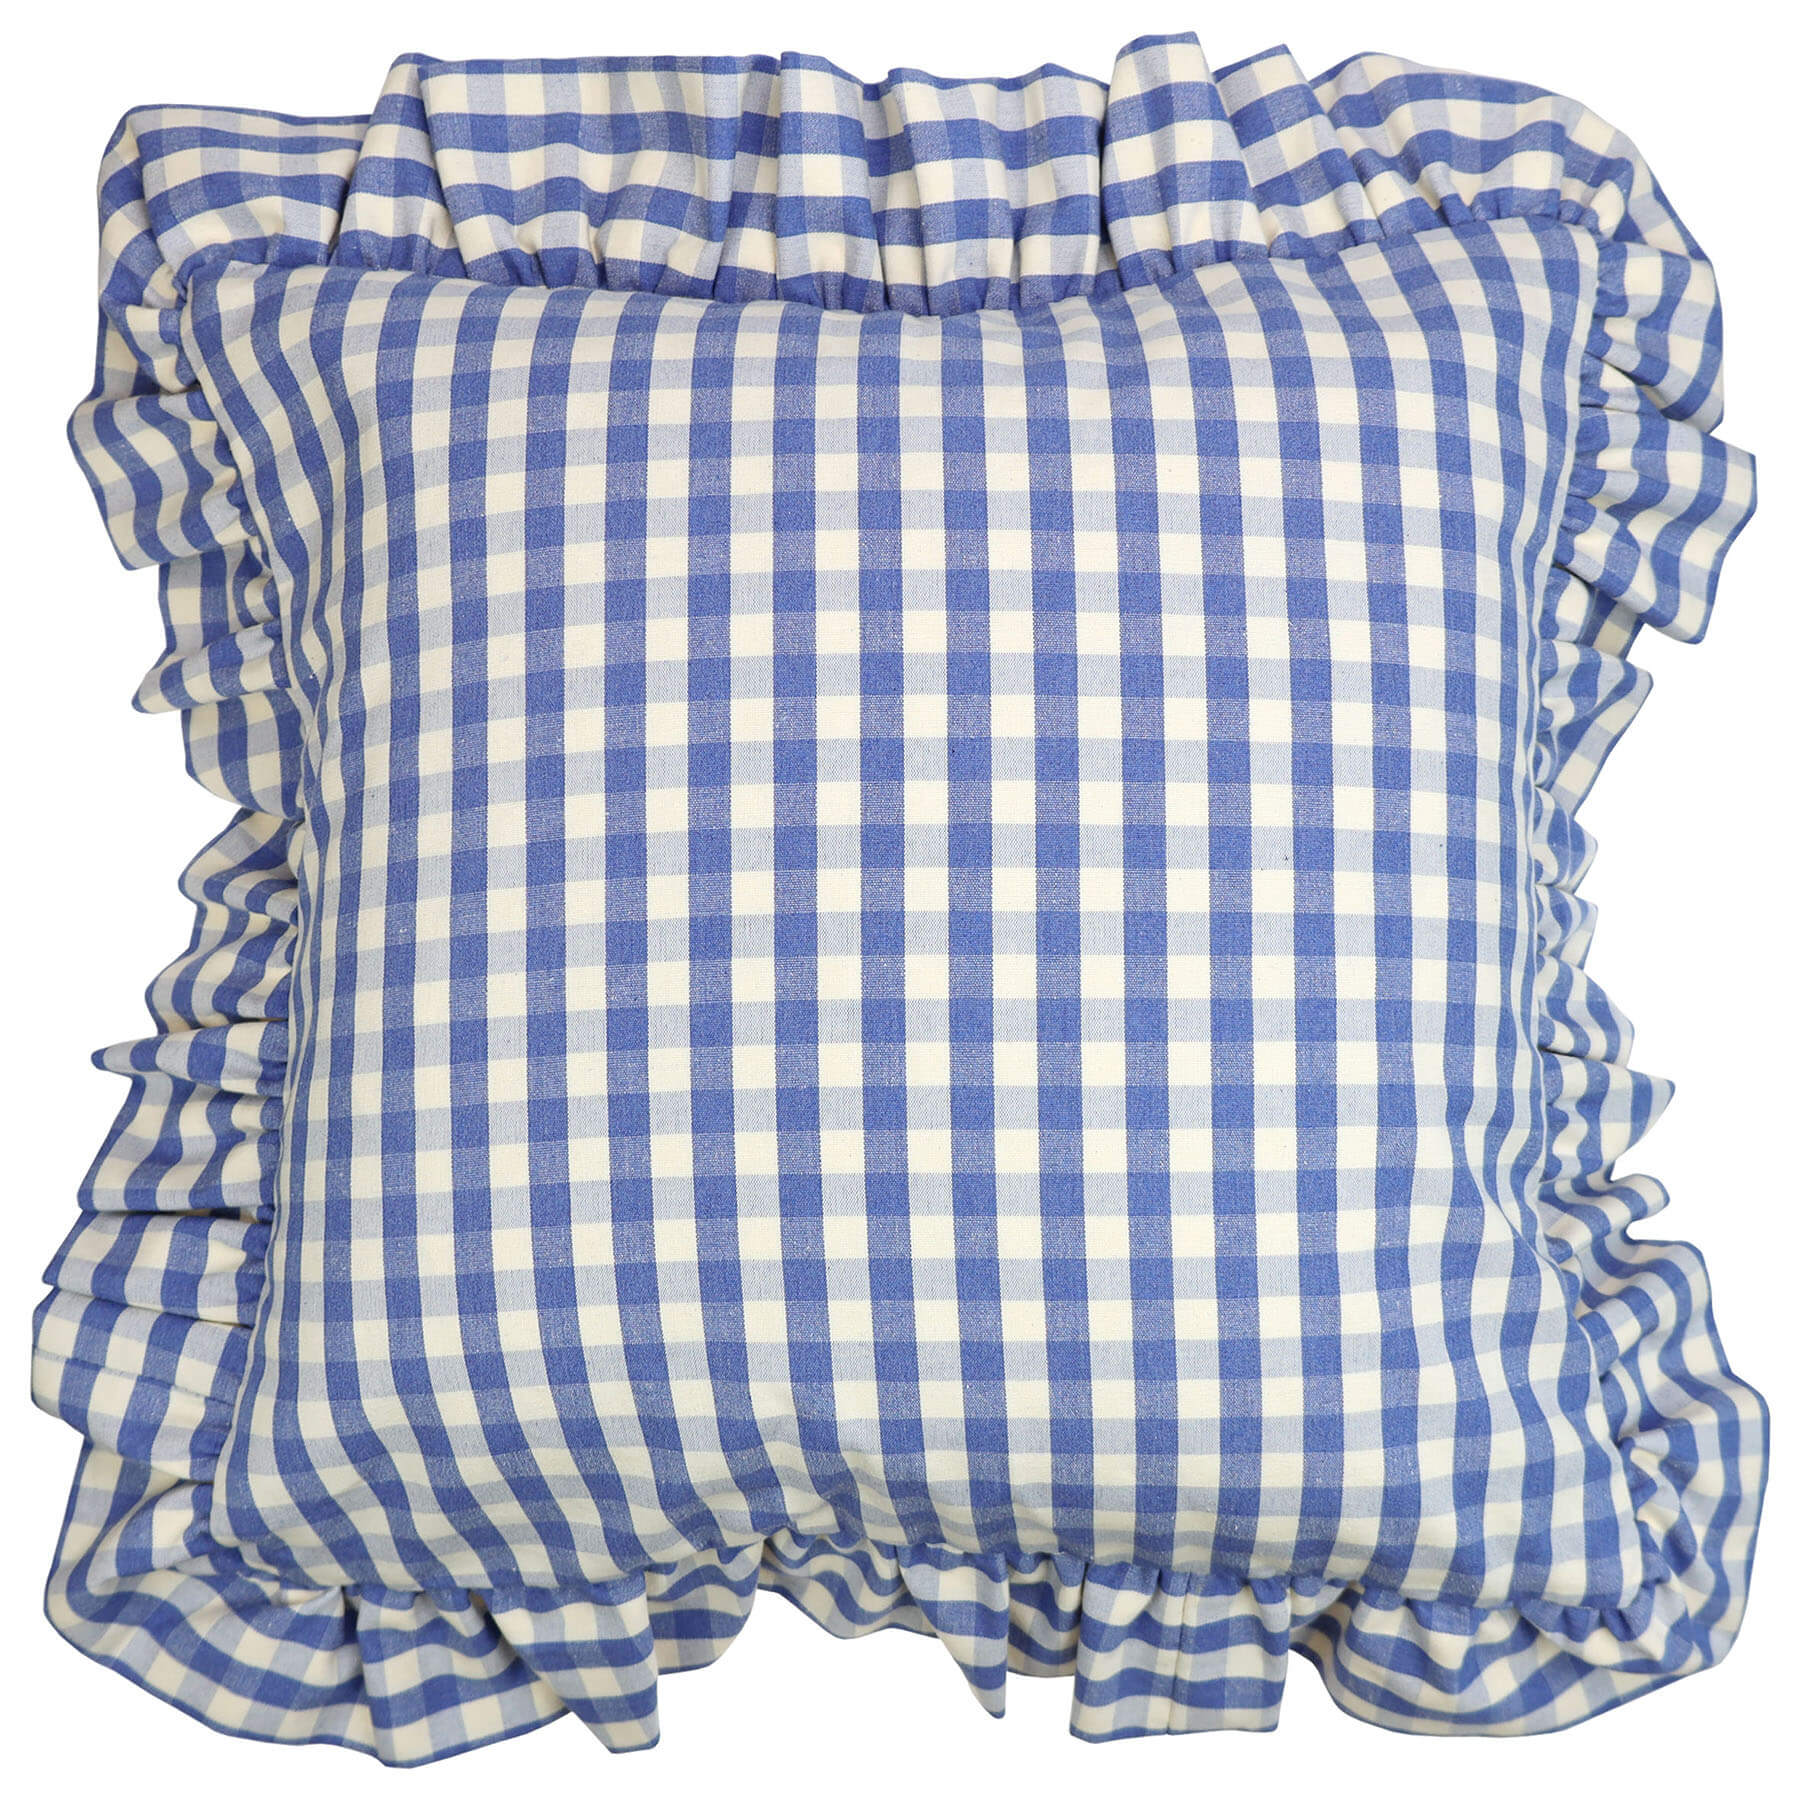 Blue and White Gingham cushion with a wide frill all around the edge